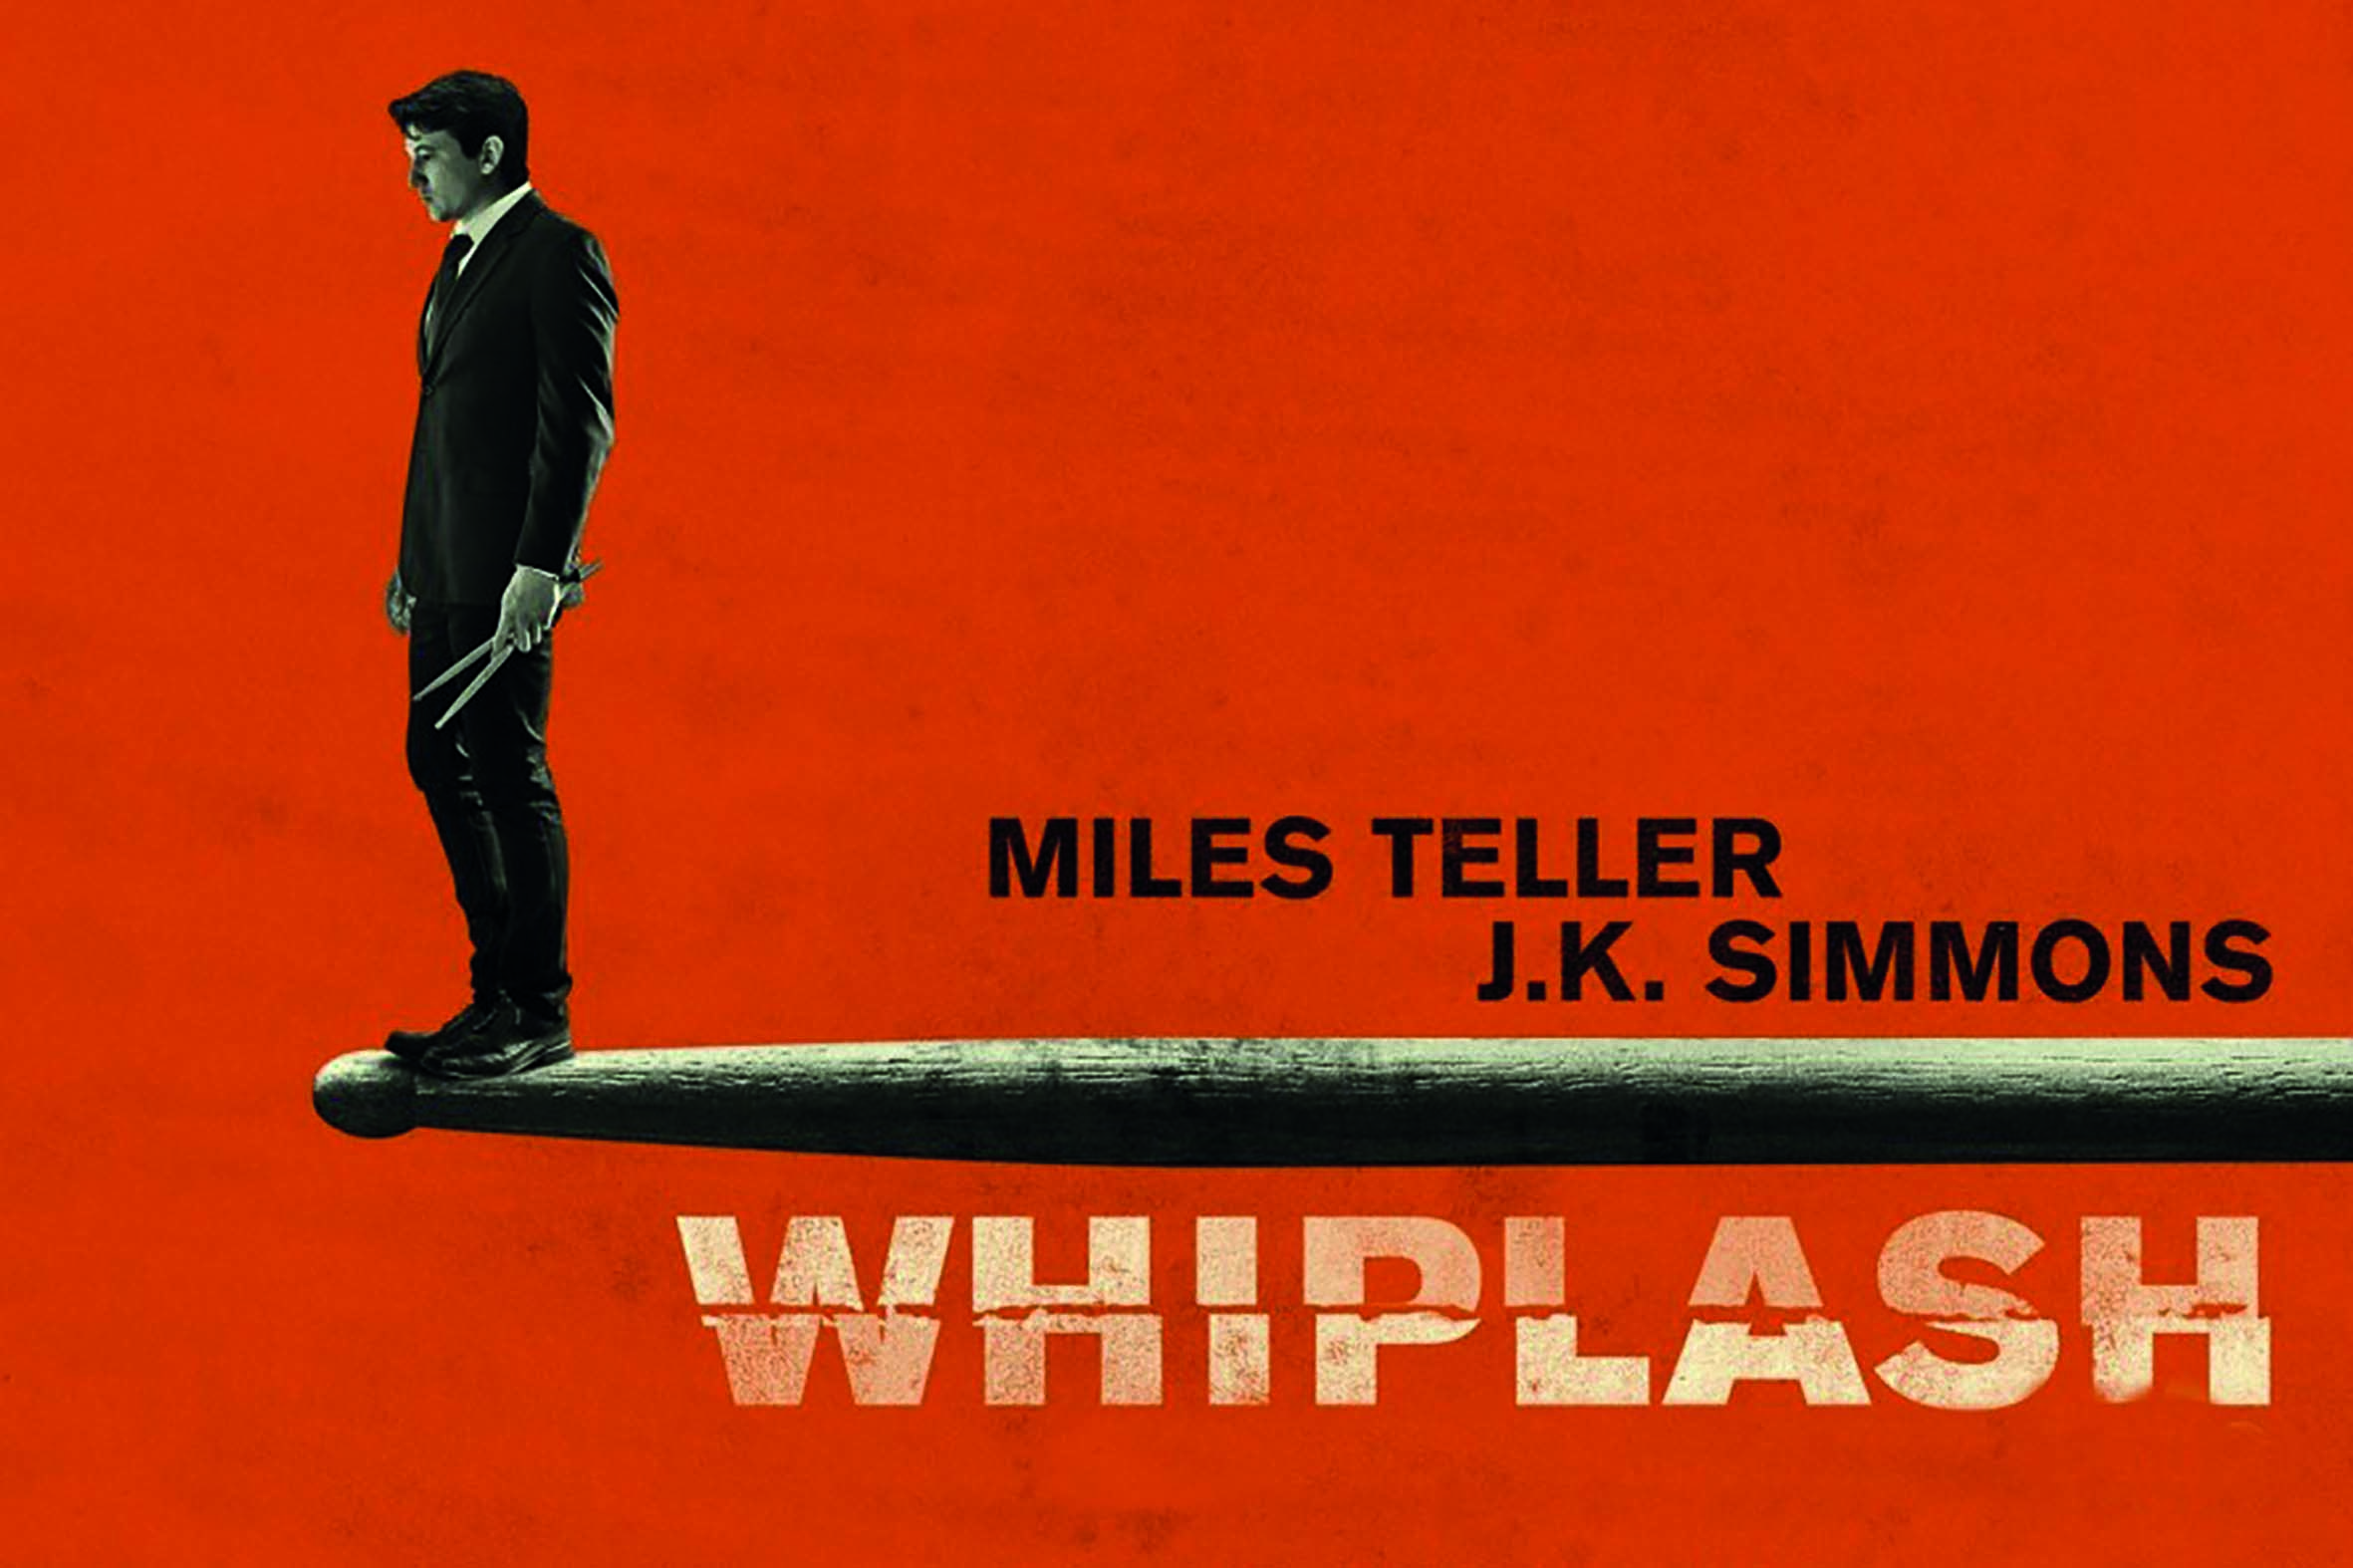 38 Facts about the movie Whiplash - Facts.net